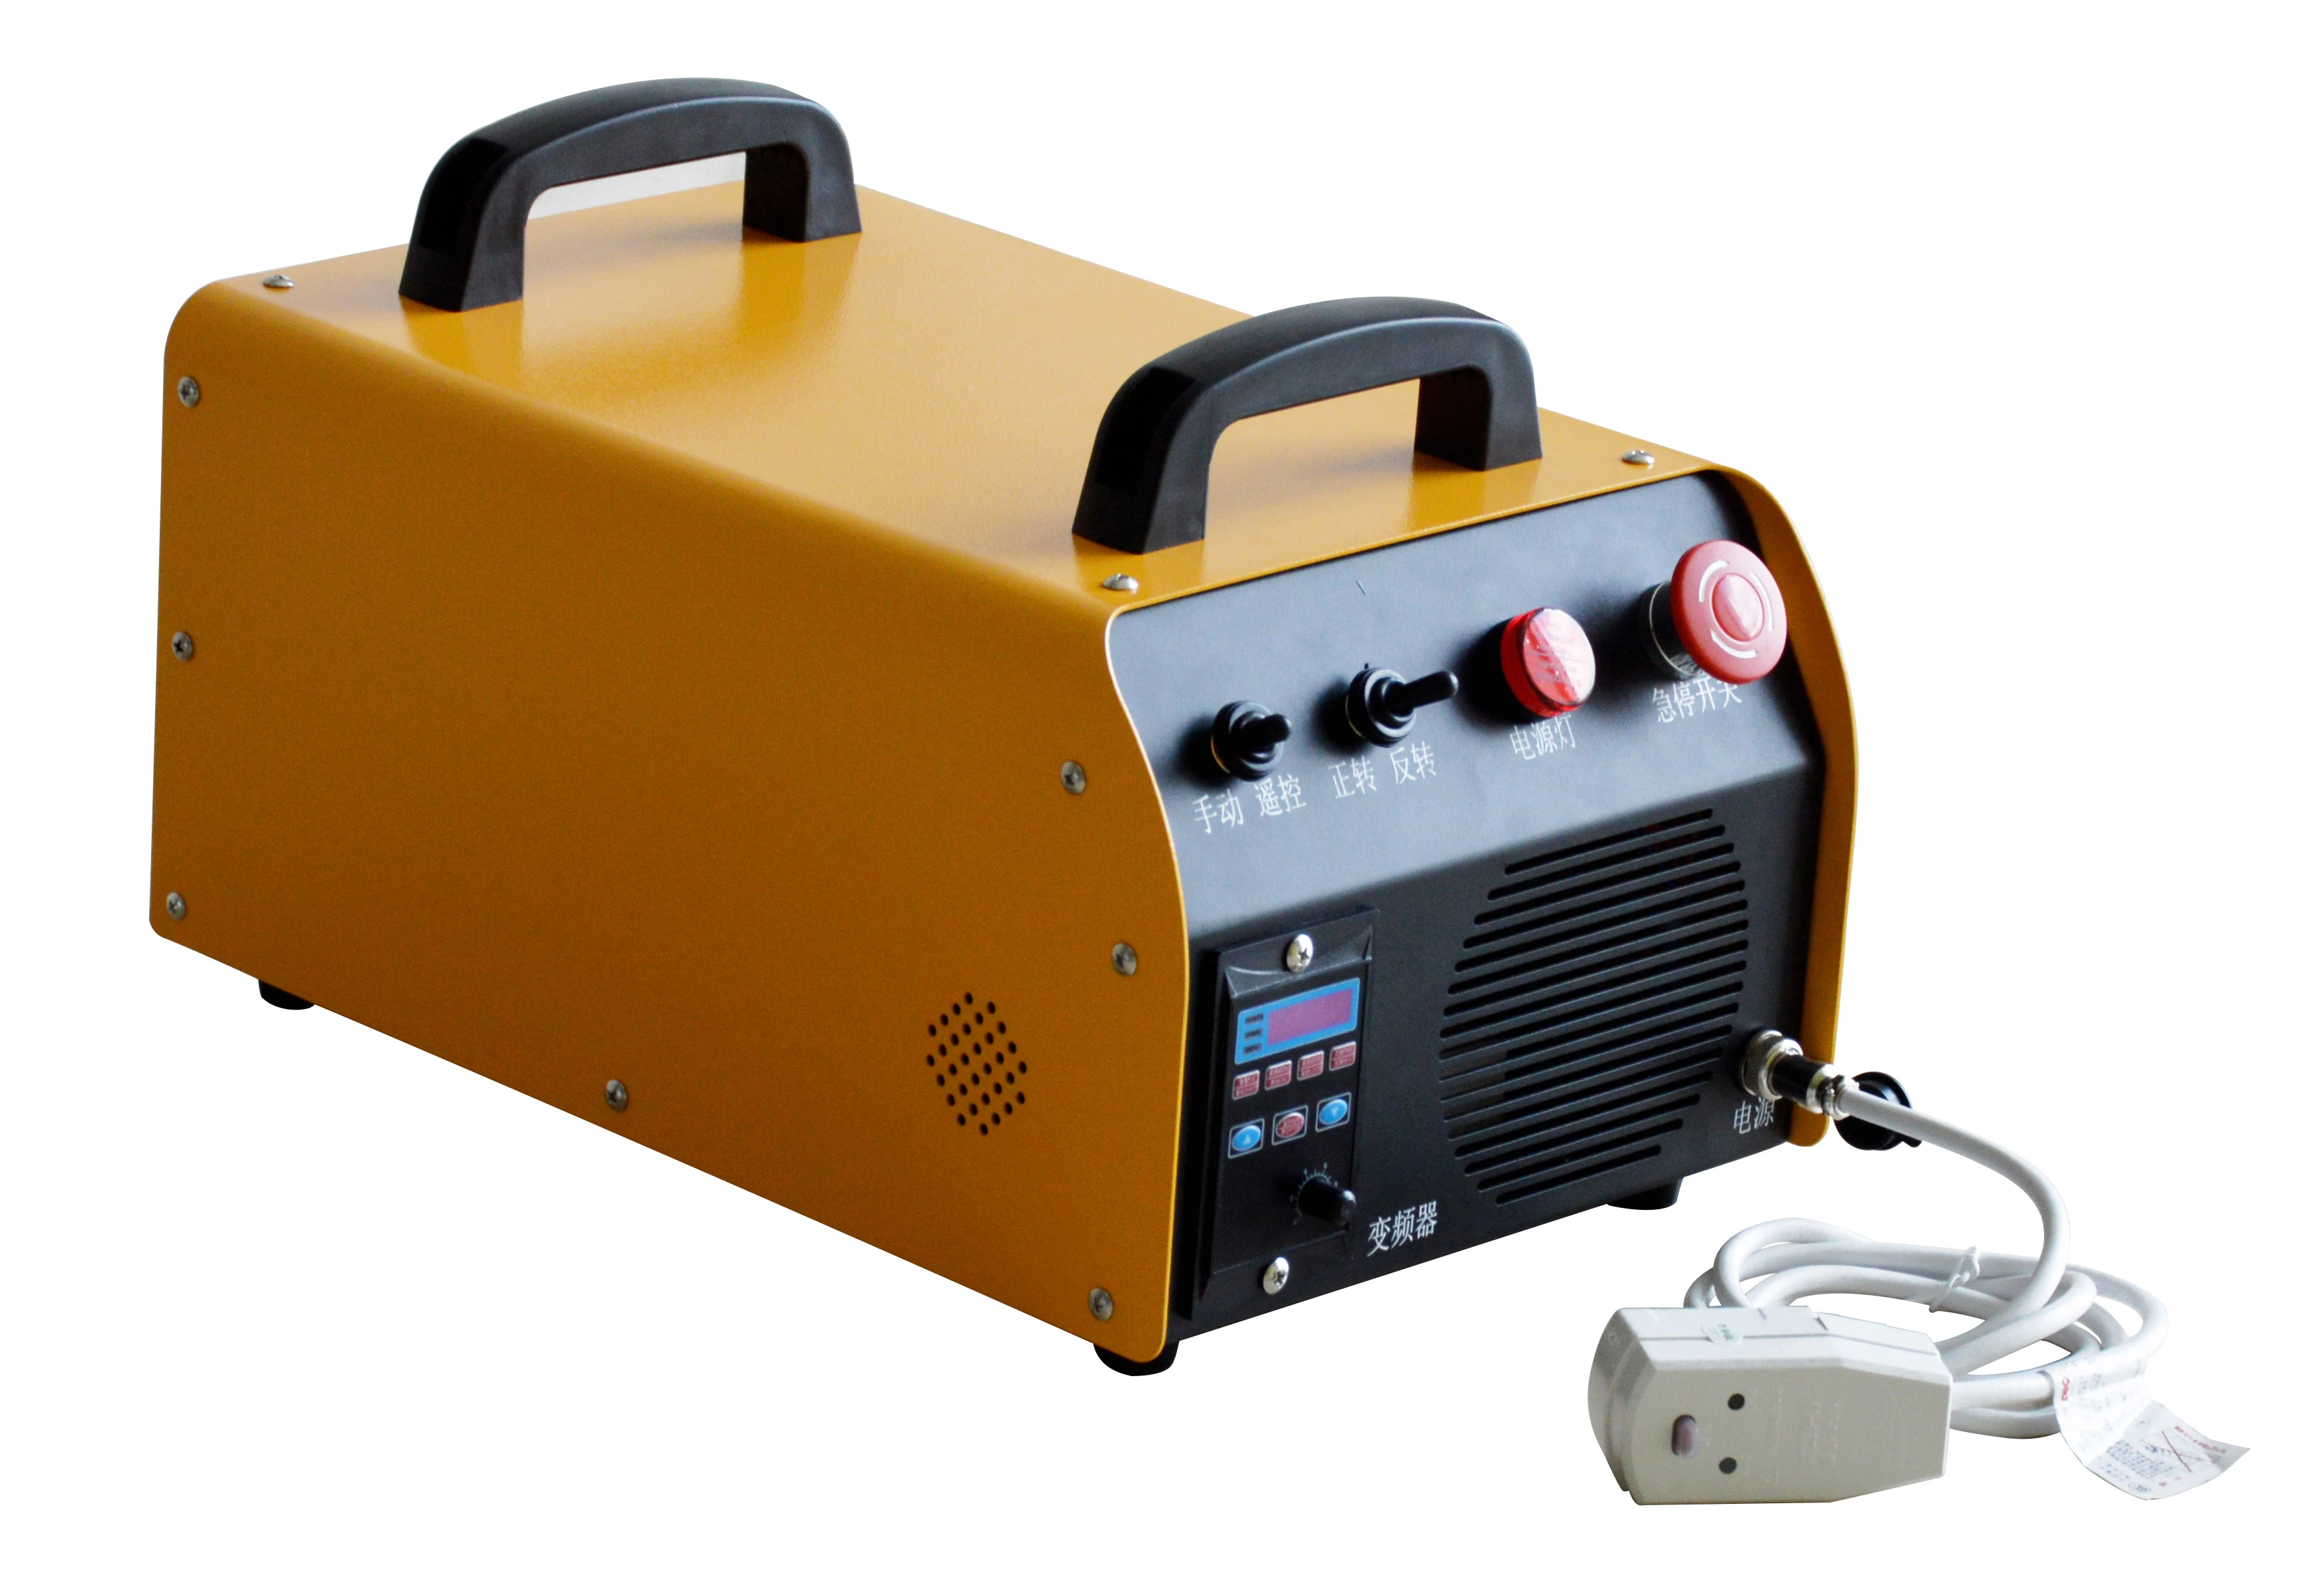 industrial and commercial cleaning applications use air duct versatile brush-cleaning machine with a electric drive